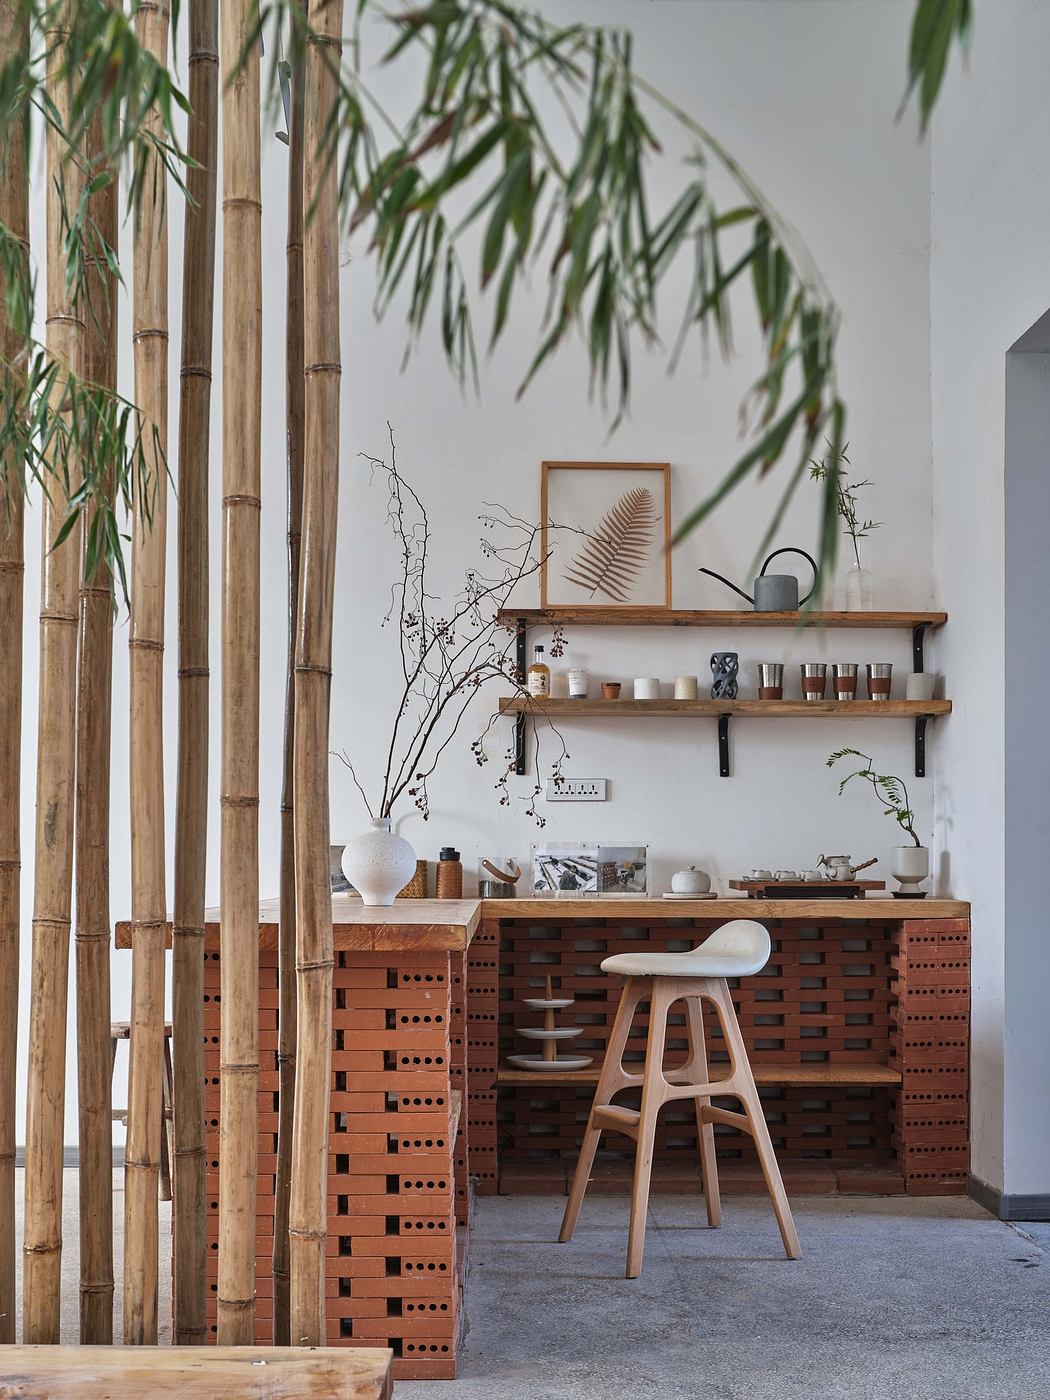 Minimalist interior with bamboo divider and wooden desk setup.